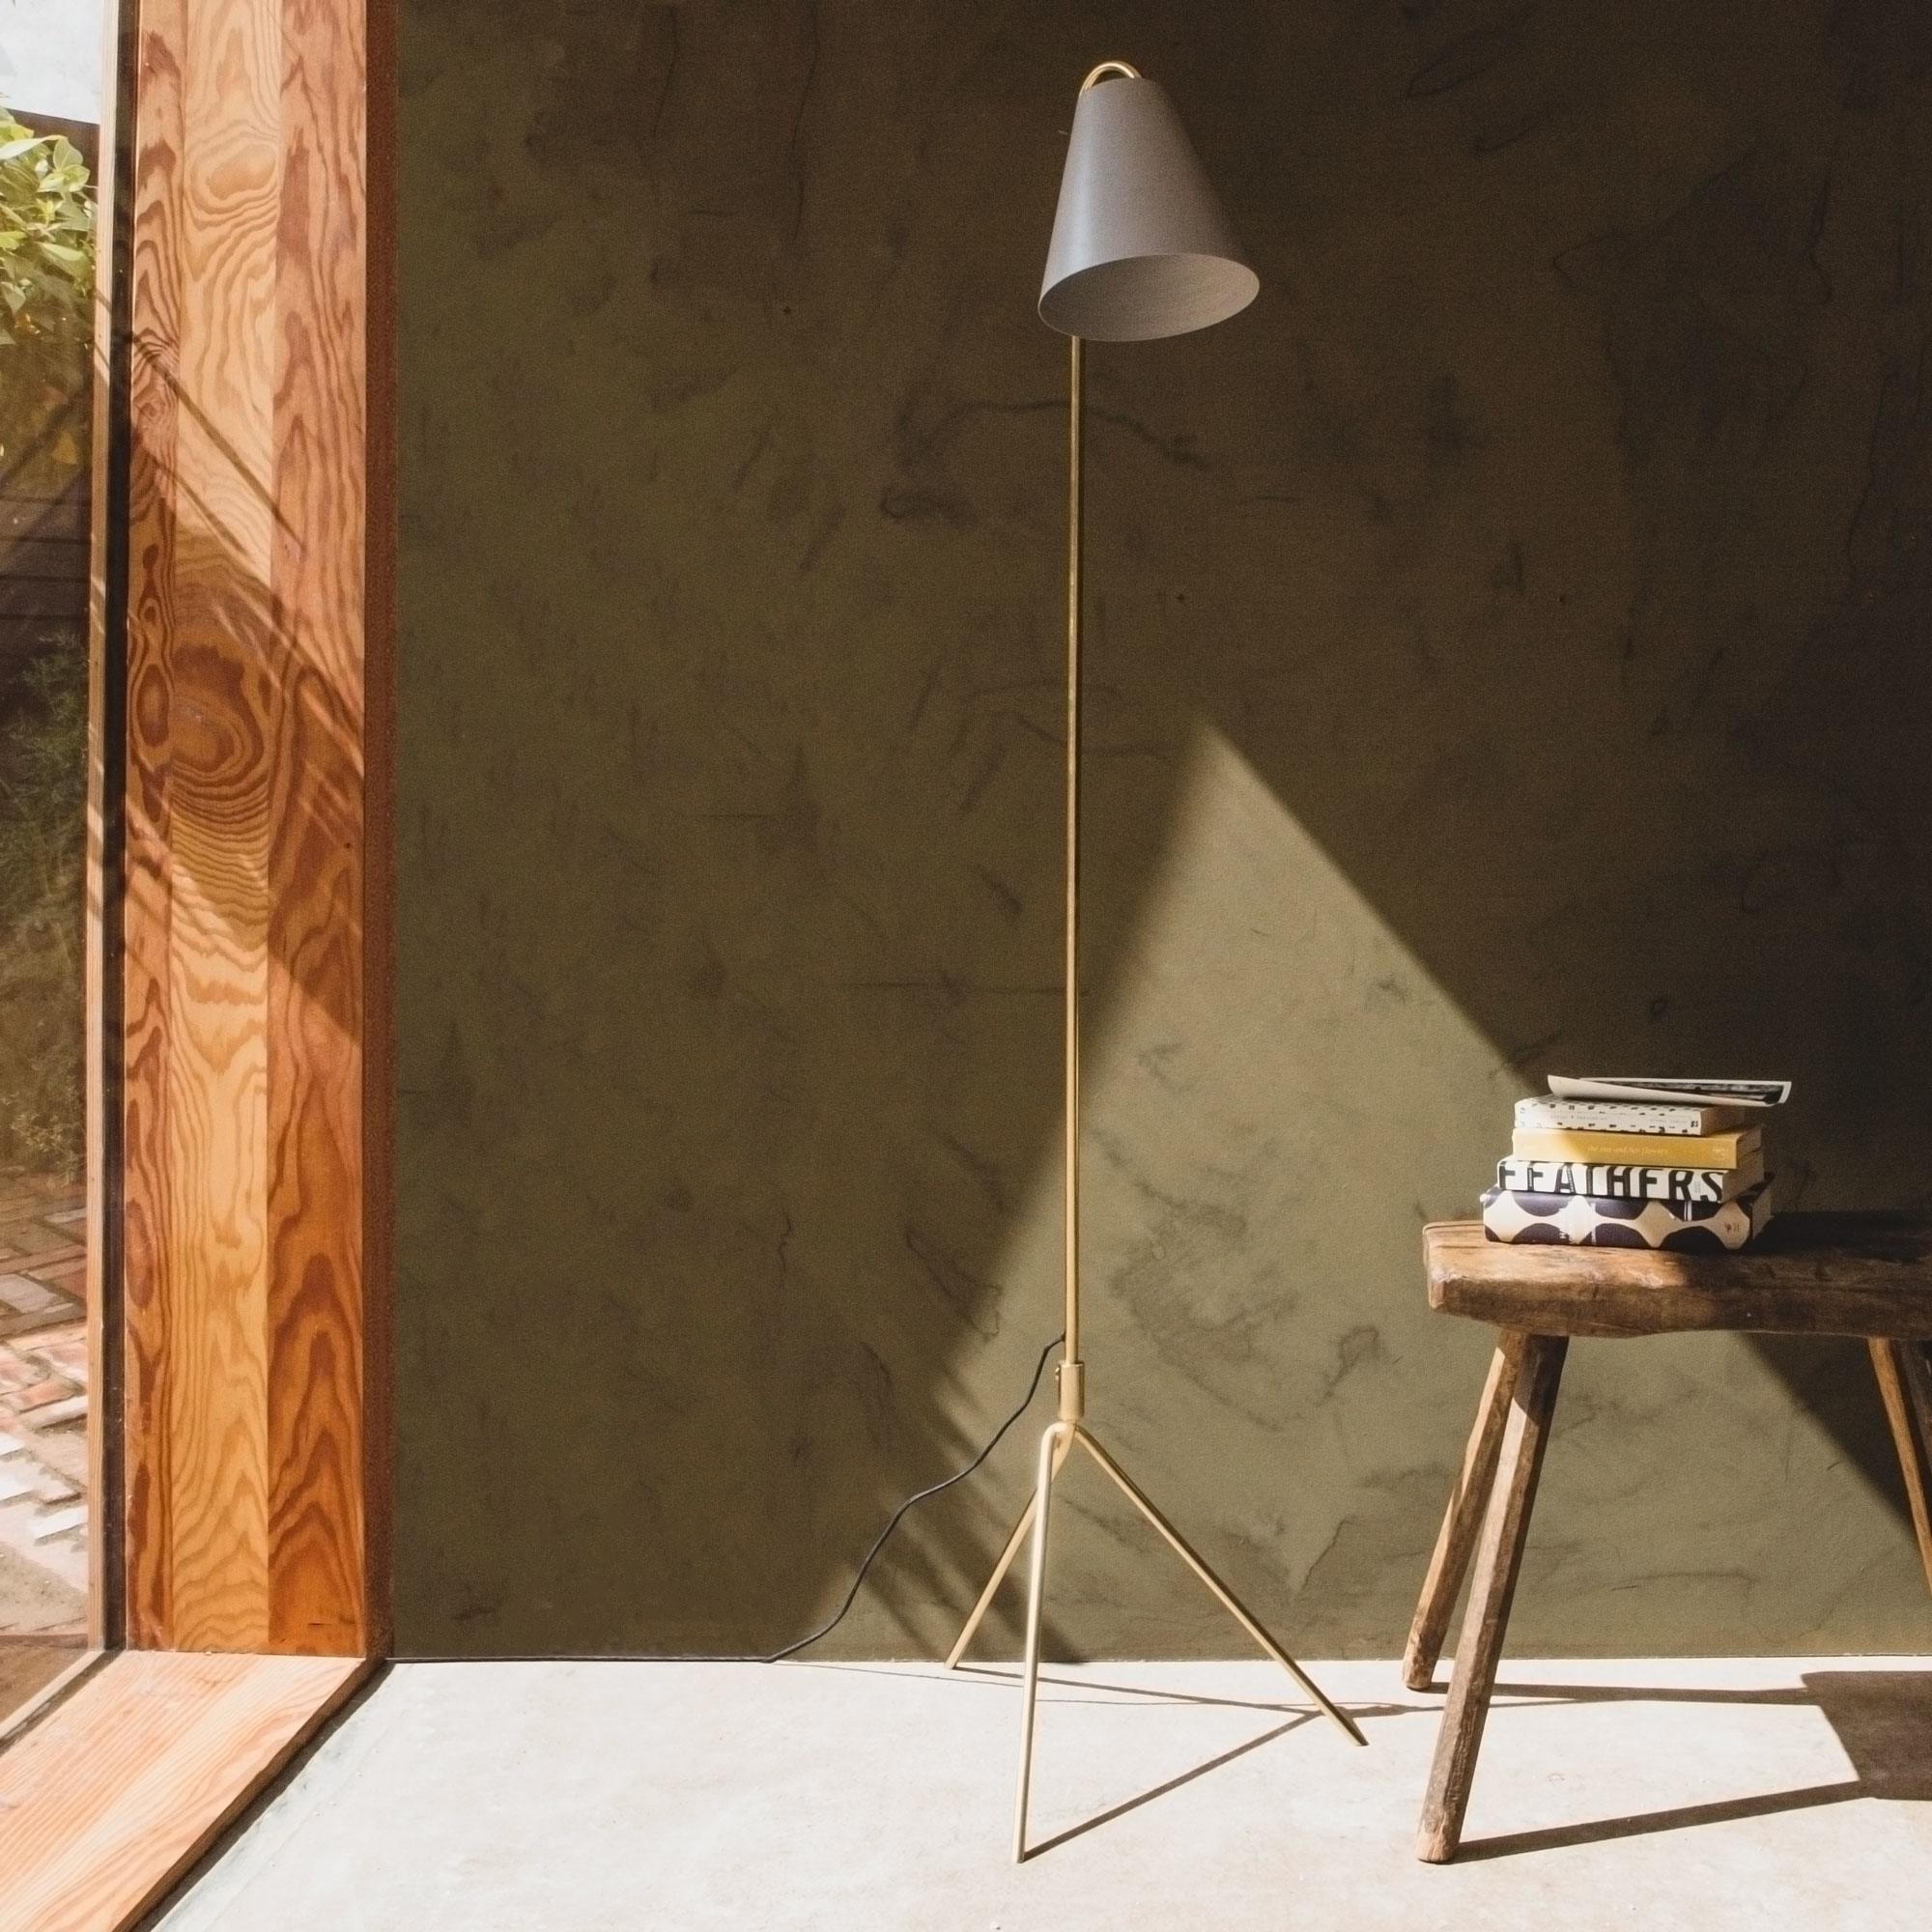 Read more about Graham and green asva grey floor lamp